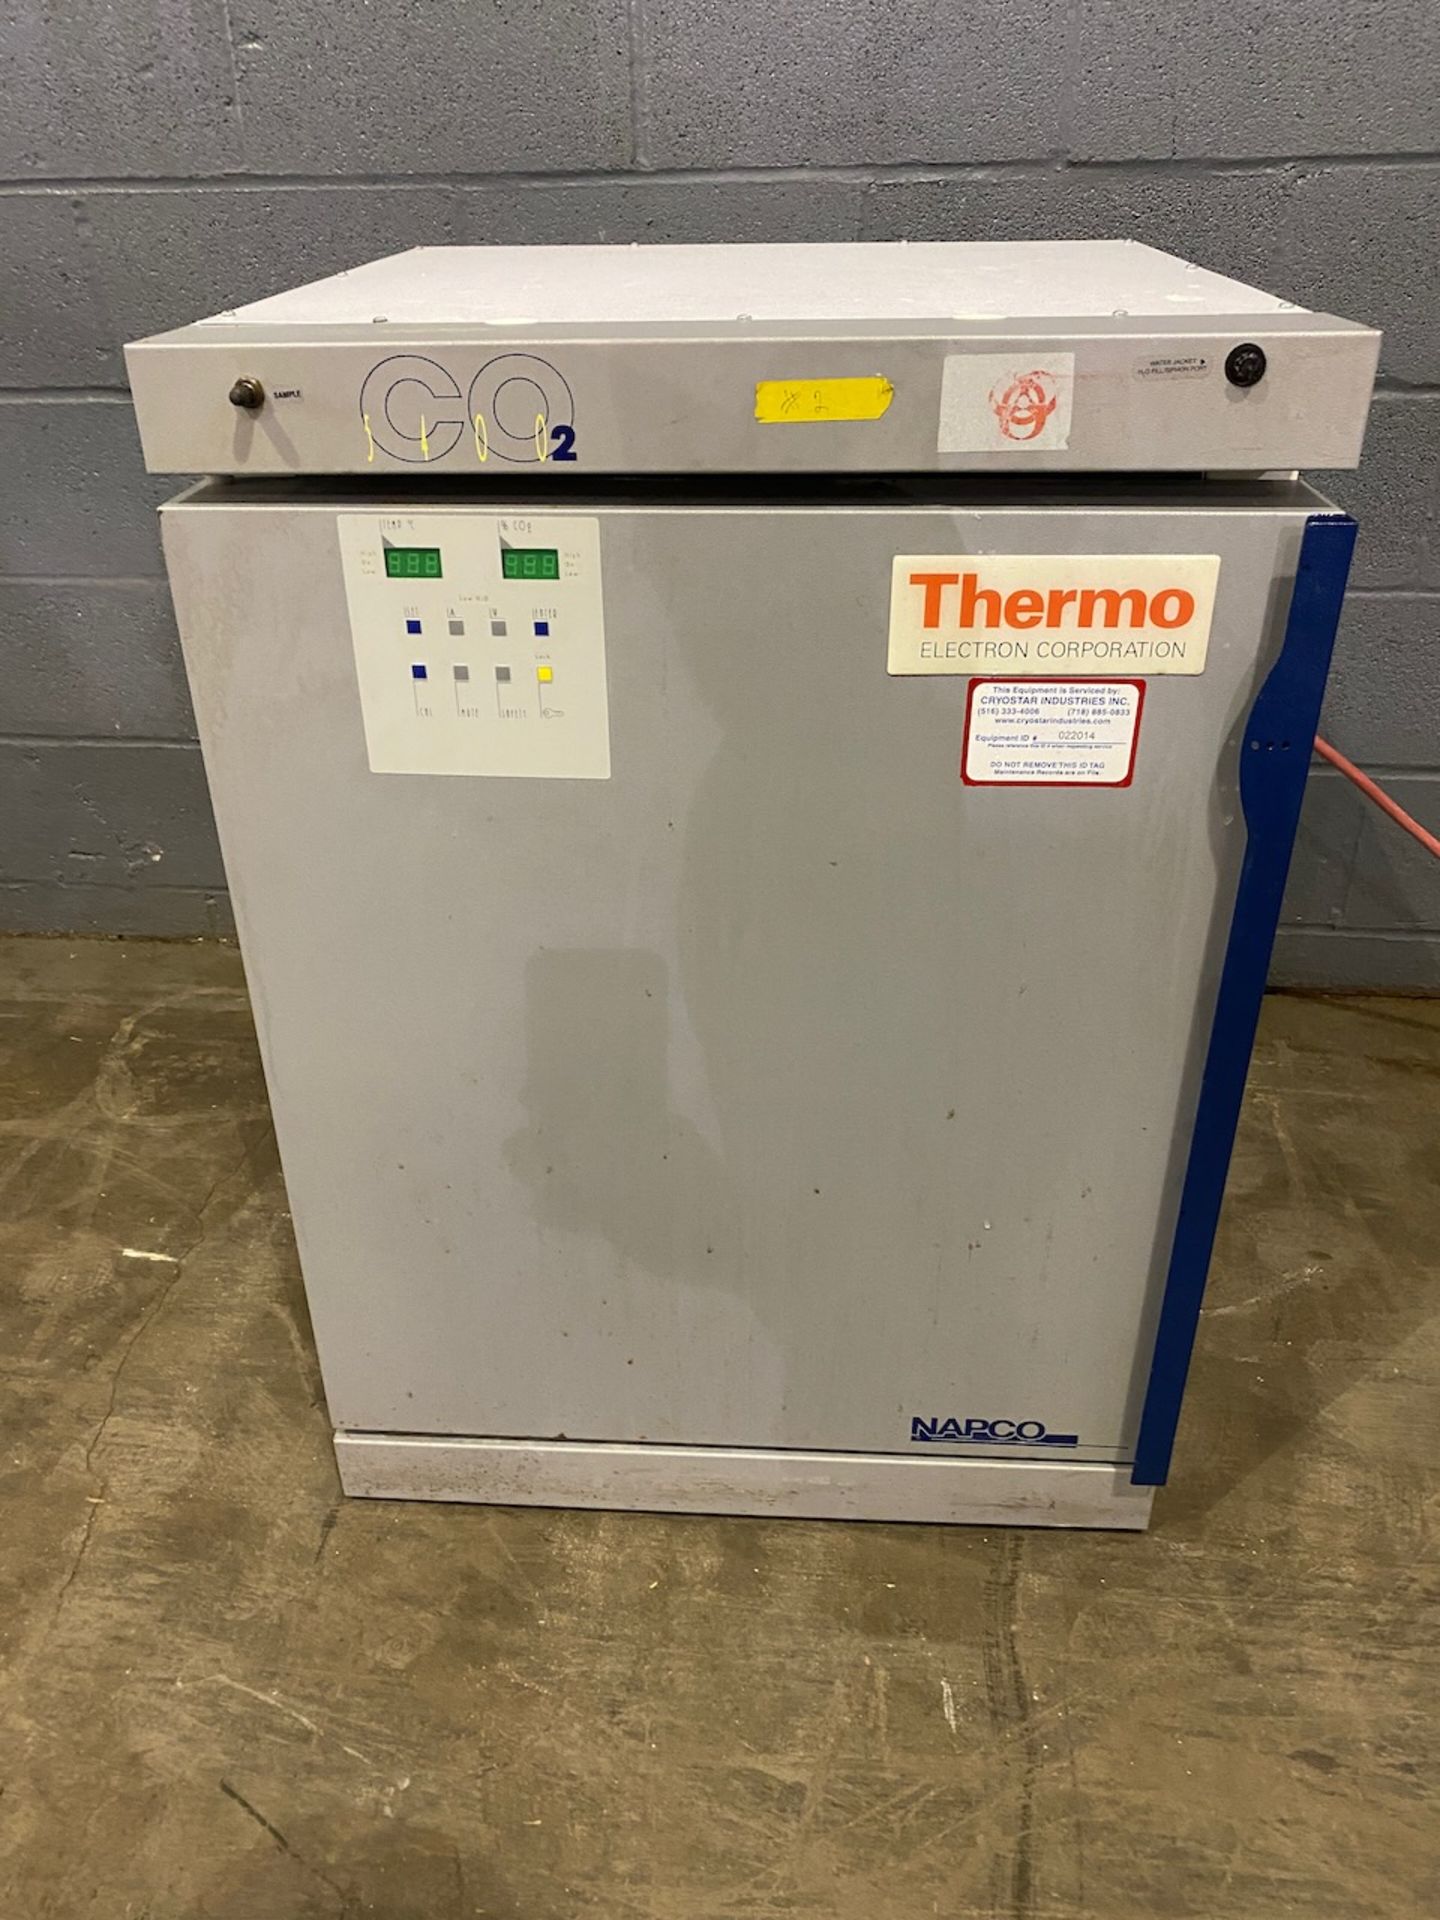 Thermo Electron Precision C02 Incubator, catalog 51201063, 17" x 18" x 26" tall chamber, S/N